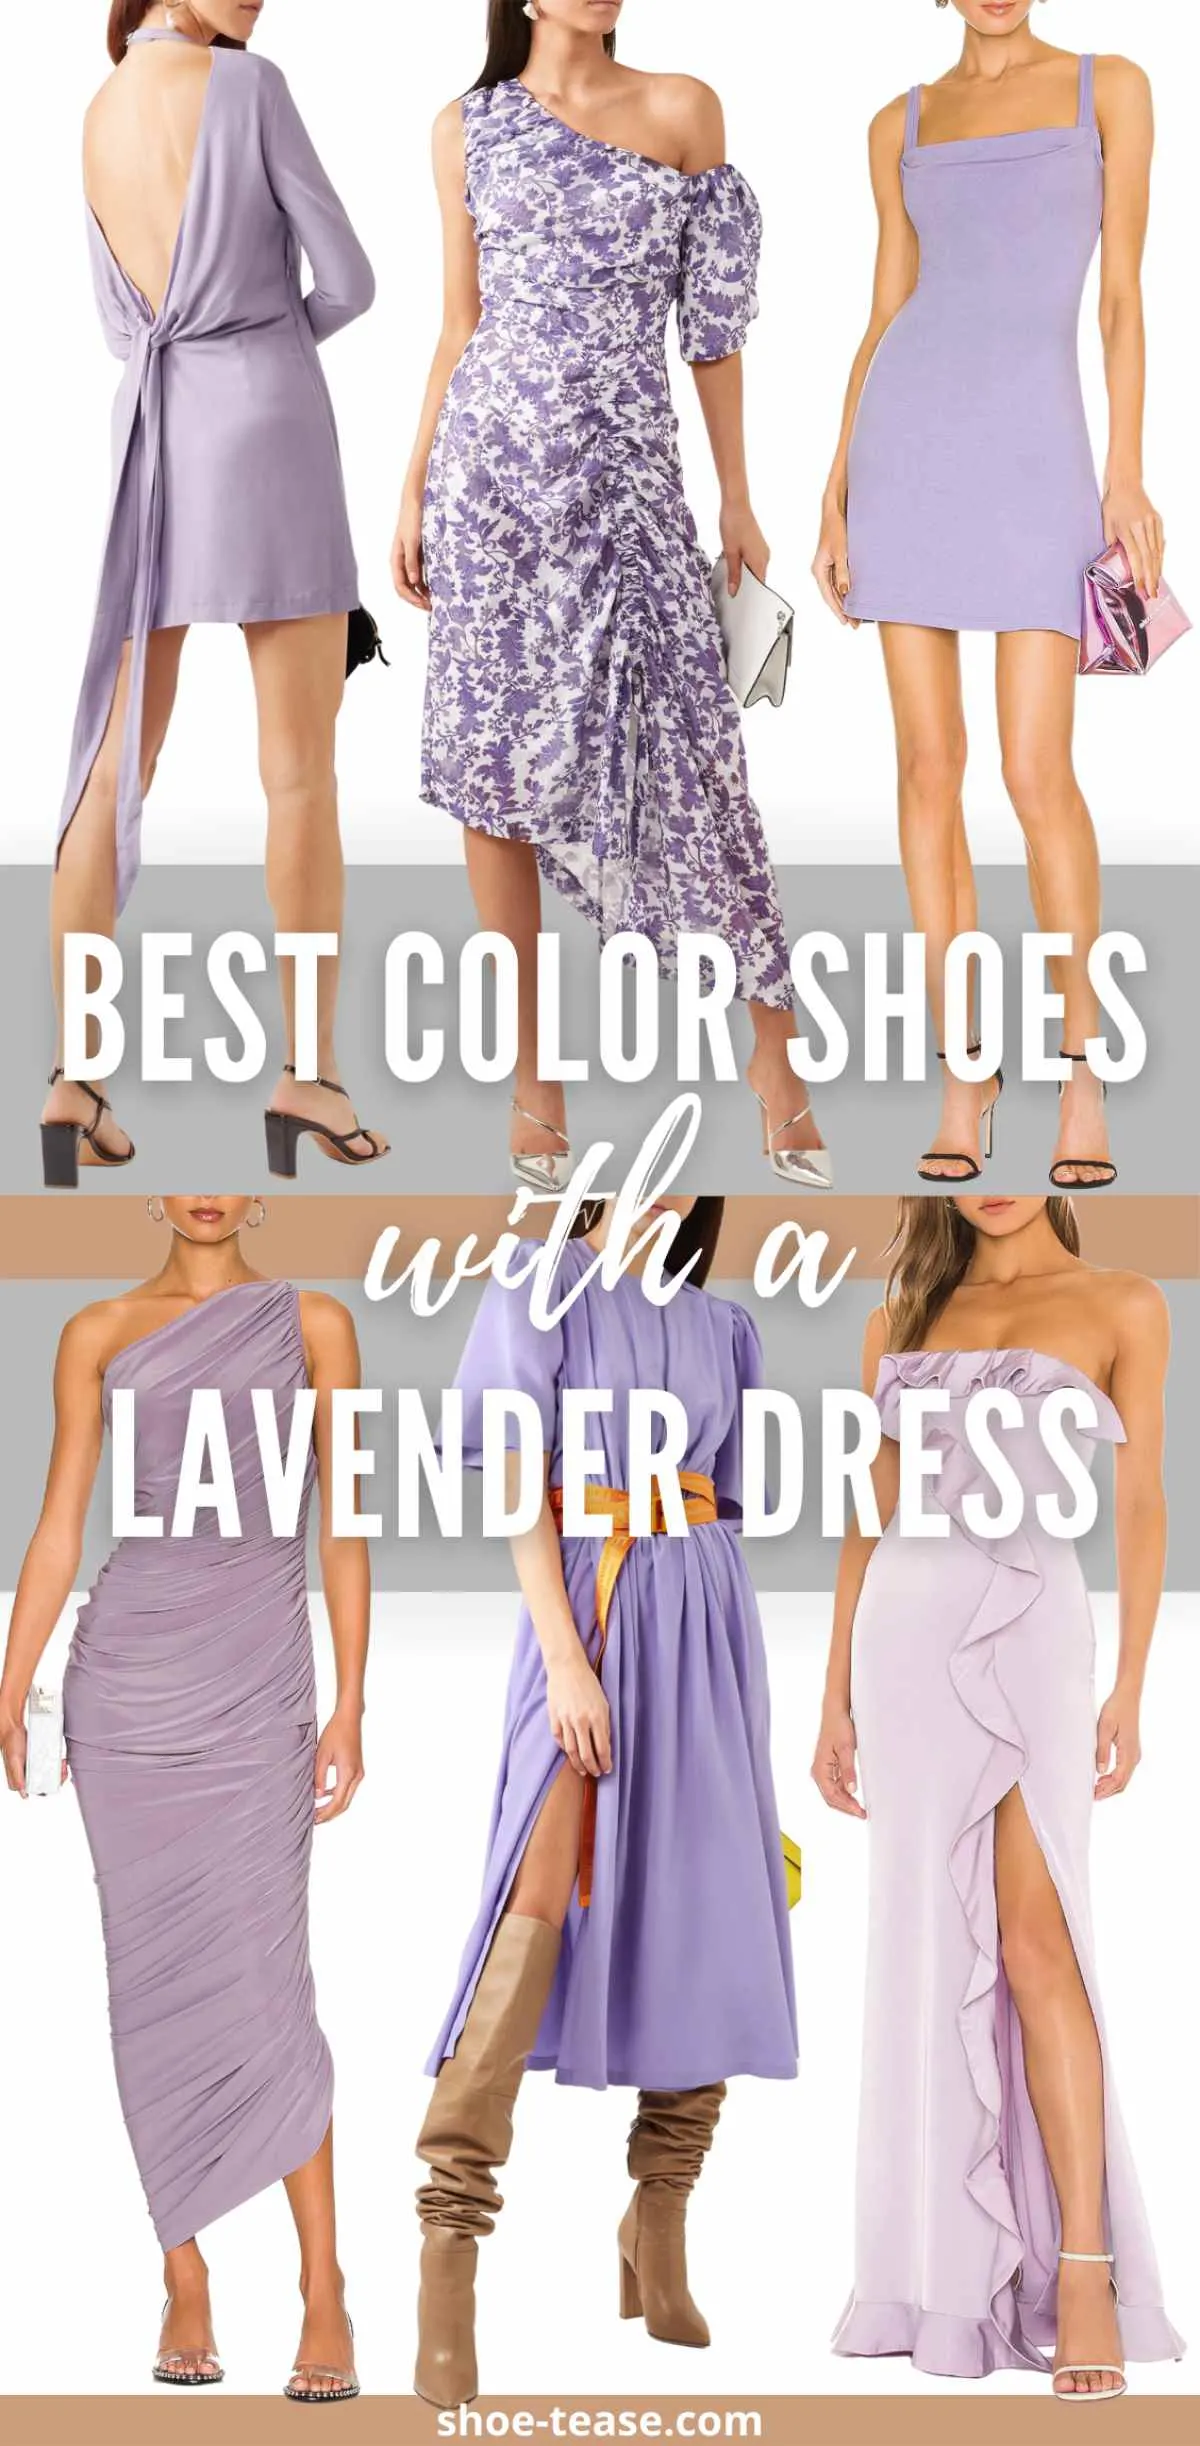 Text reading best color shoes with lavender dress over 6 women wearing different lavender dress outfits.